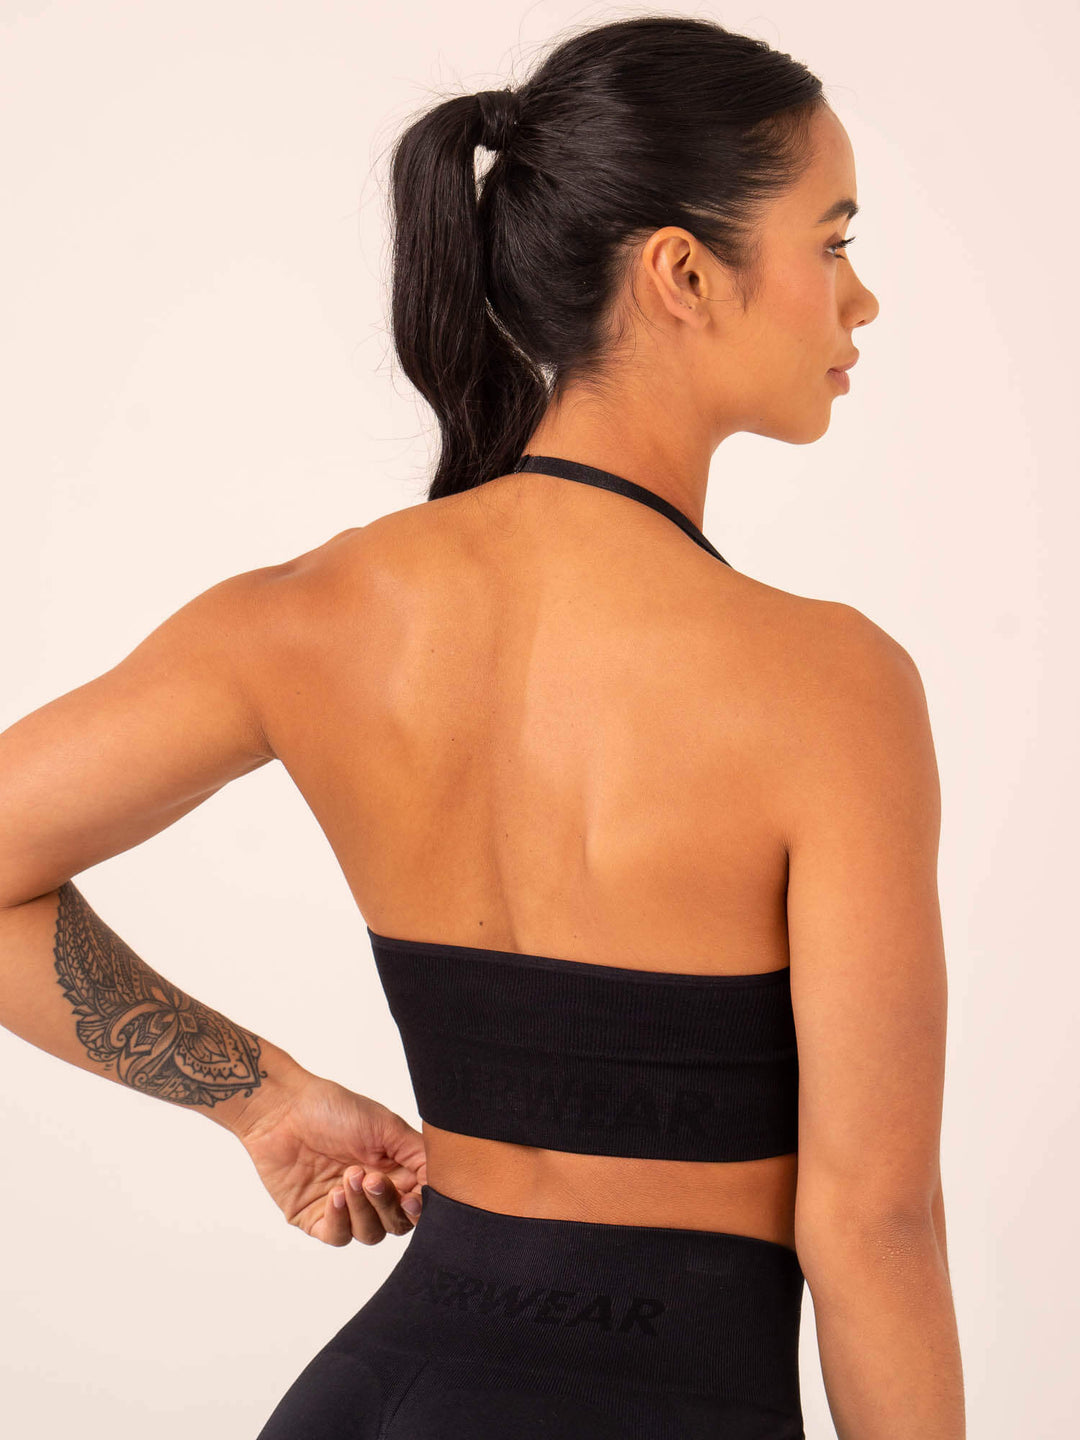 Style Guide: High Neck Halter Bra in Your Outfit - GB